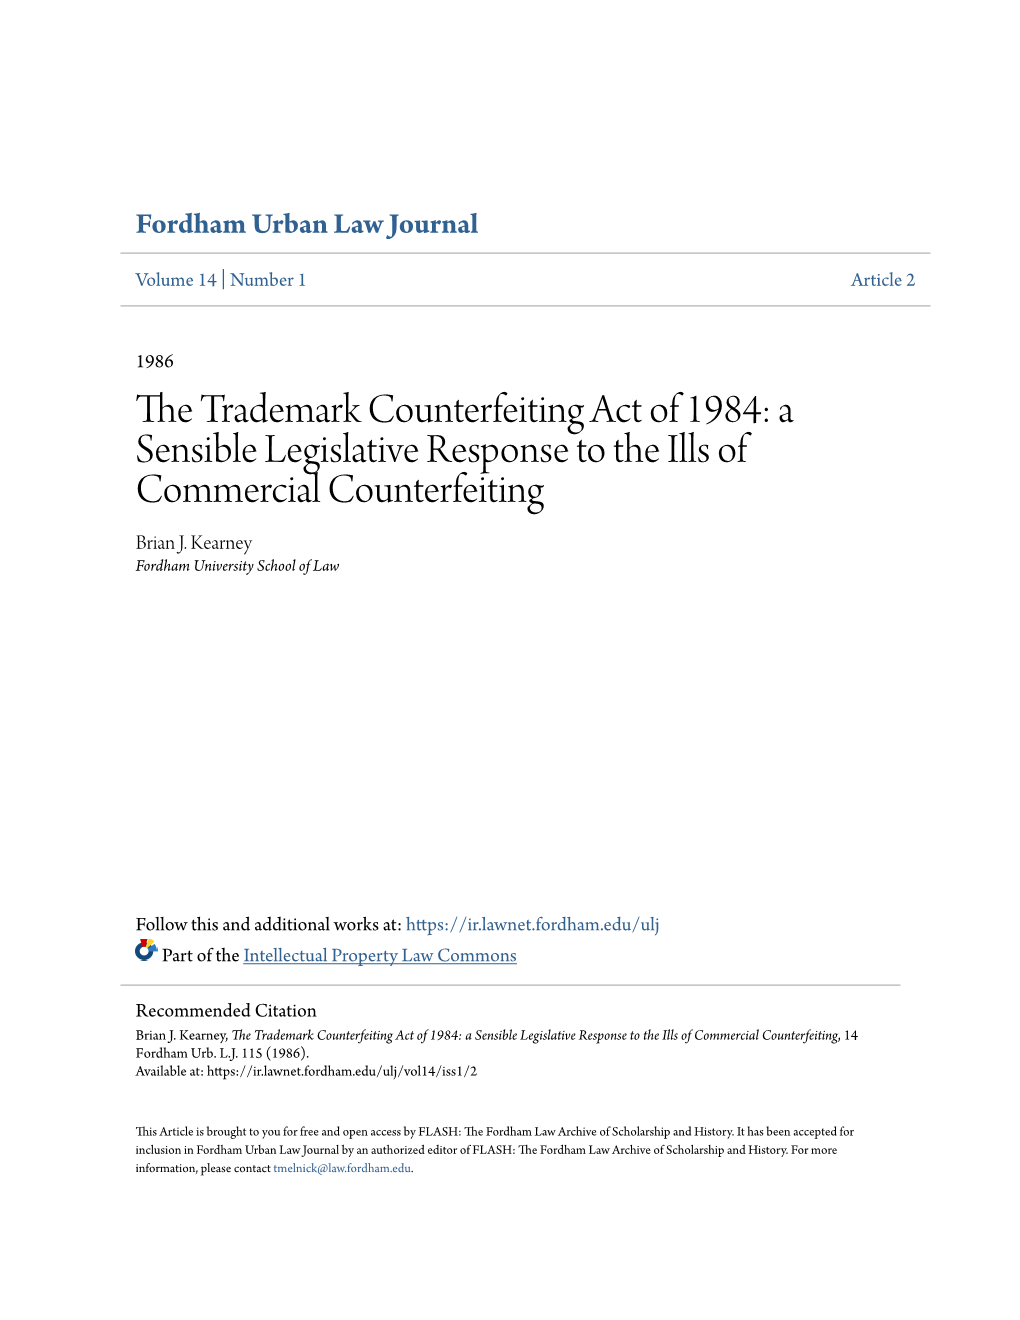 The Trademark Counterfeiting Act of 1984: a Sensible Legislative Response to the Ills of Commercial Counterfeiting, 14 Fordham Urb